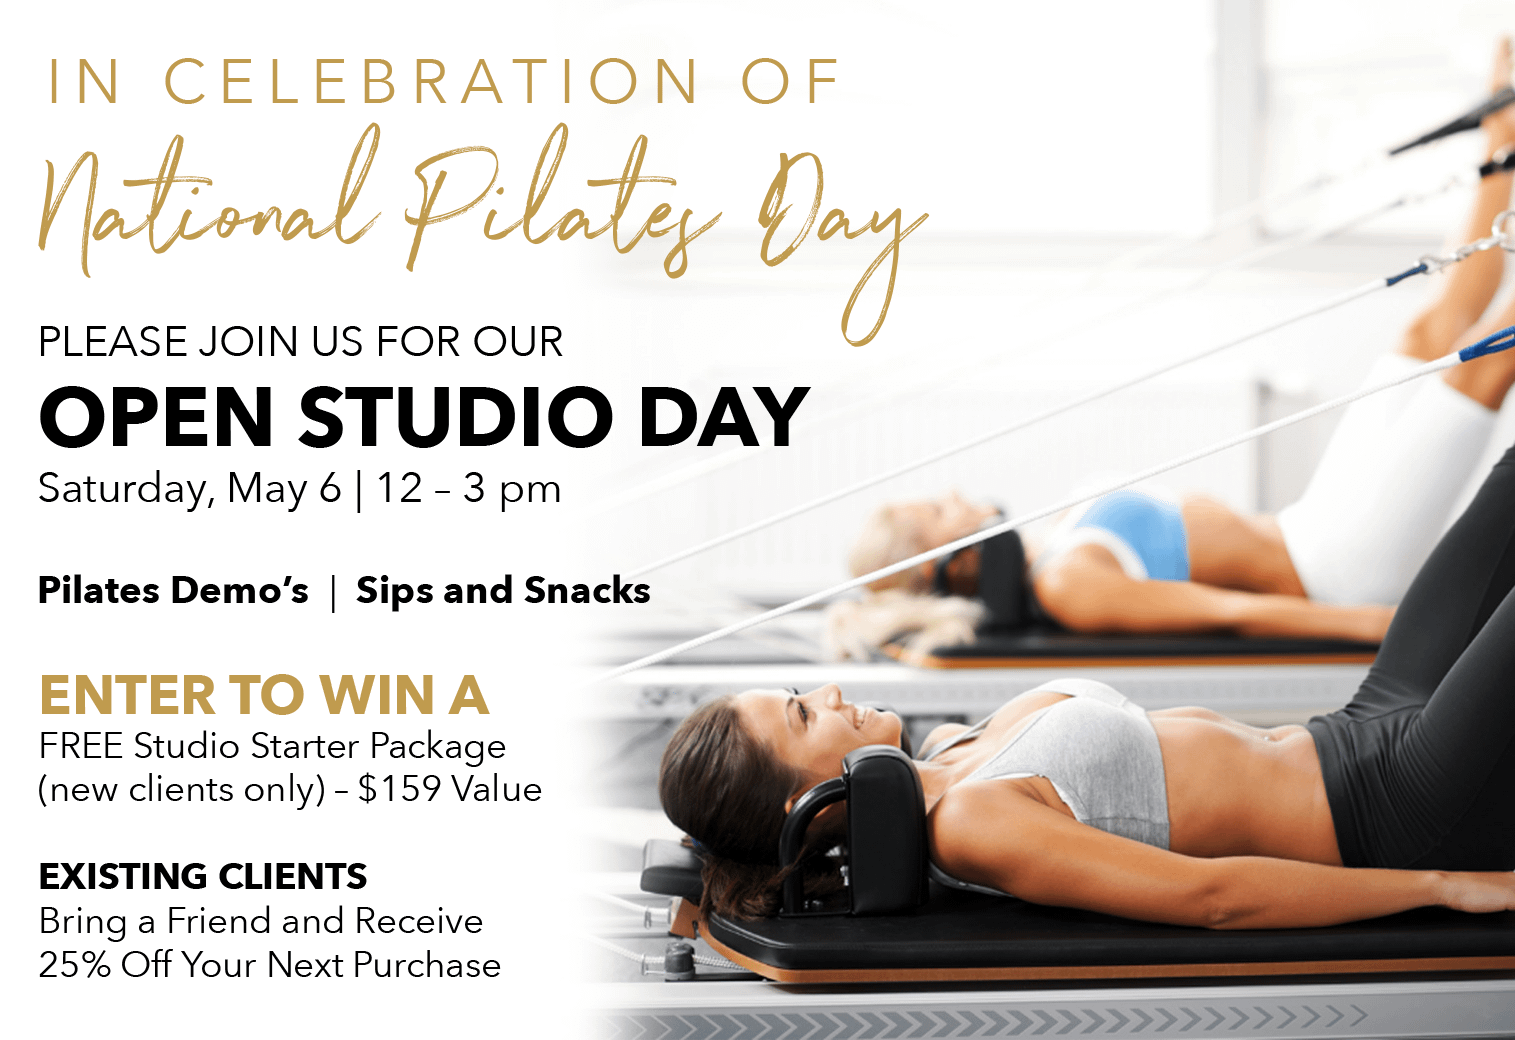 National Pilates Day Come Celebrate! The Pilates Body